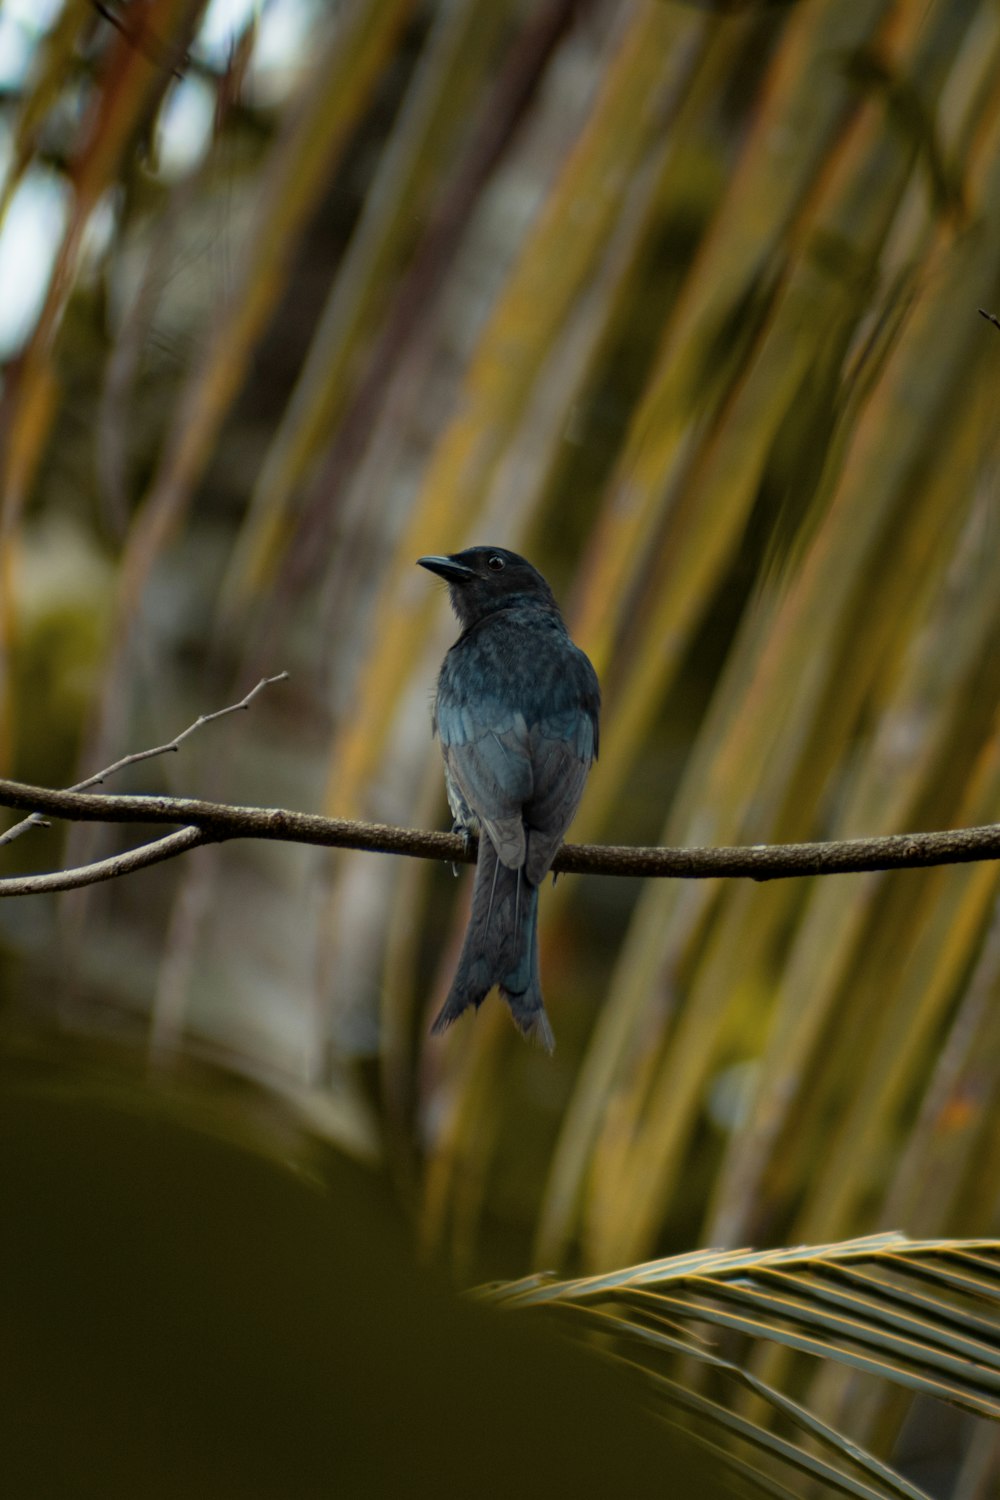 a small blue bird sitting on a tree branch